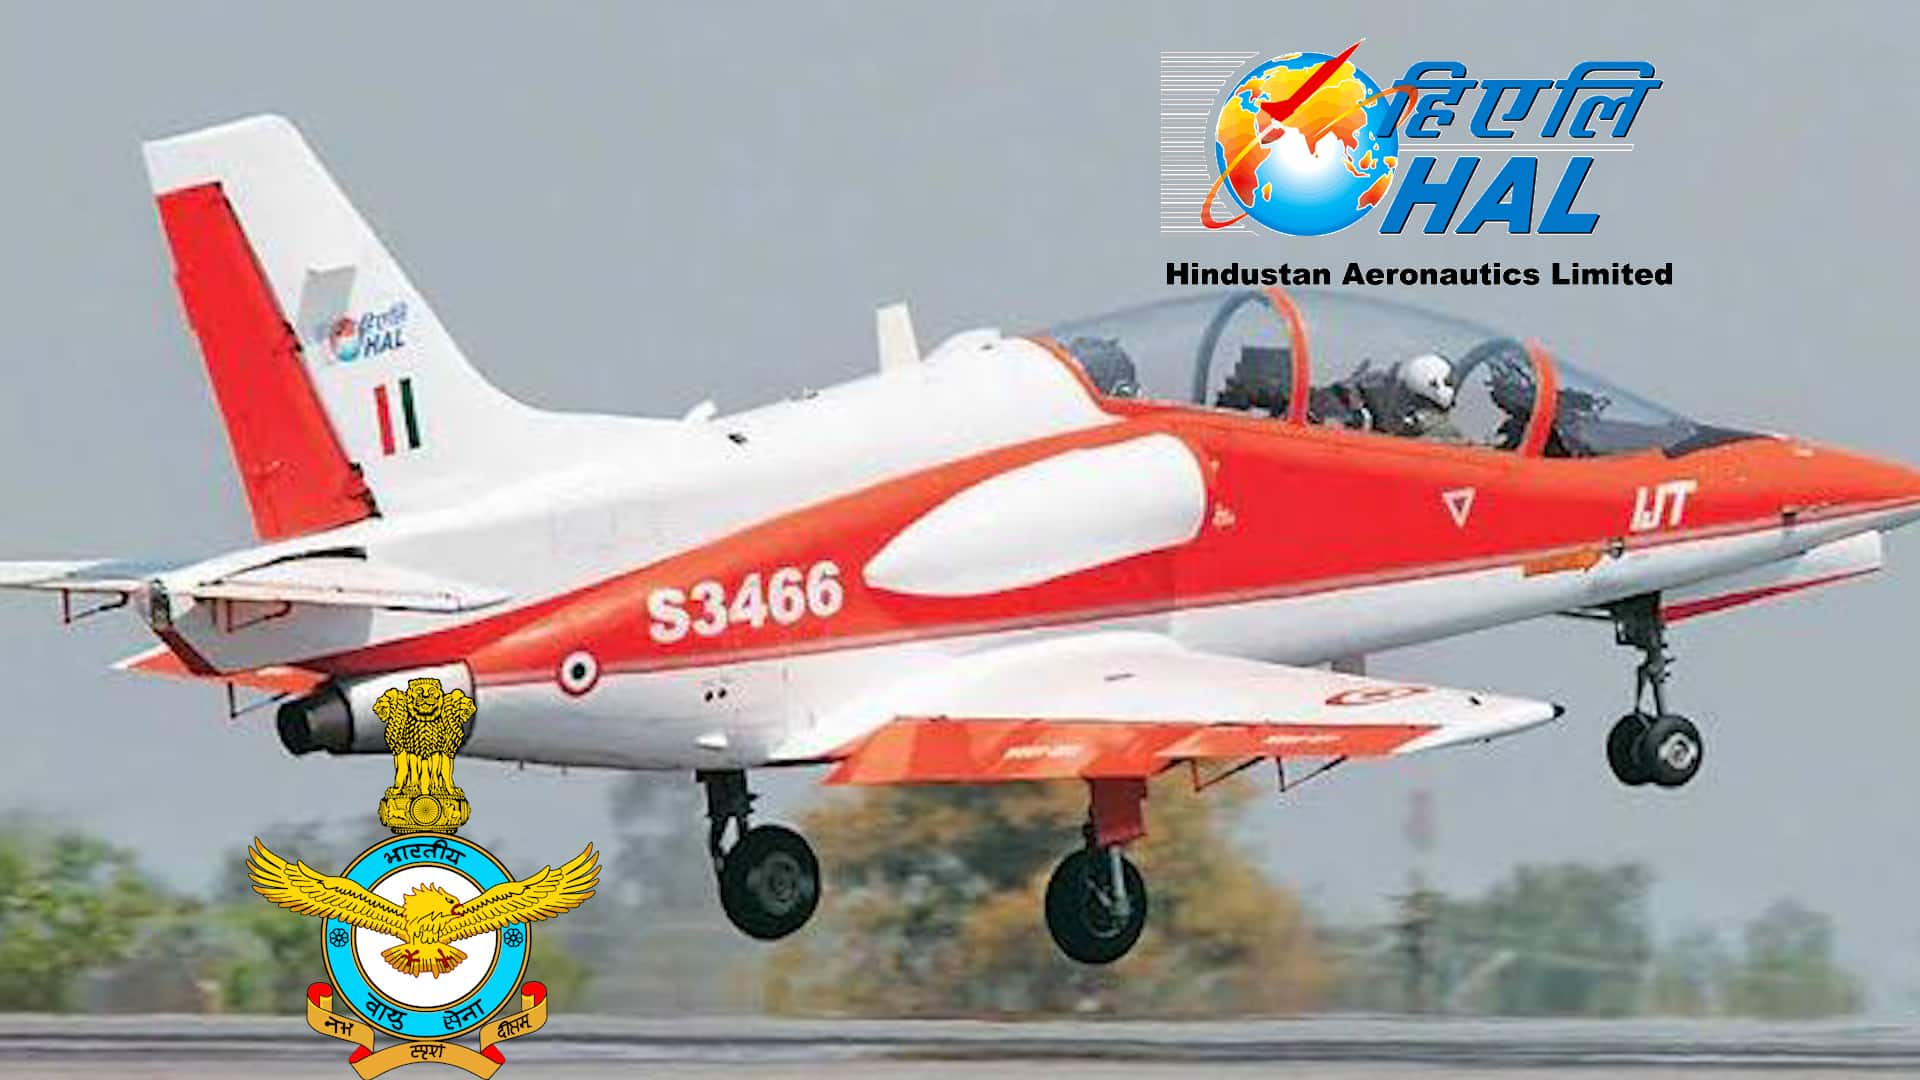 HAL's jet trainer aircraft project set to be scrapped due to long delays, safety issues